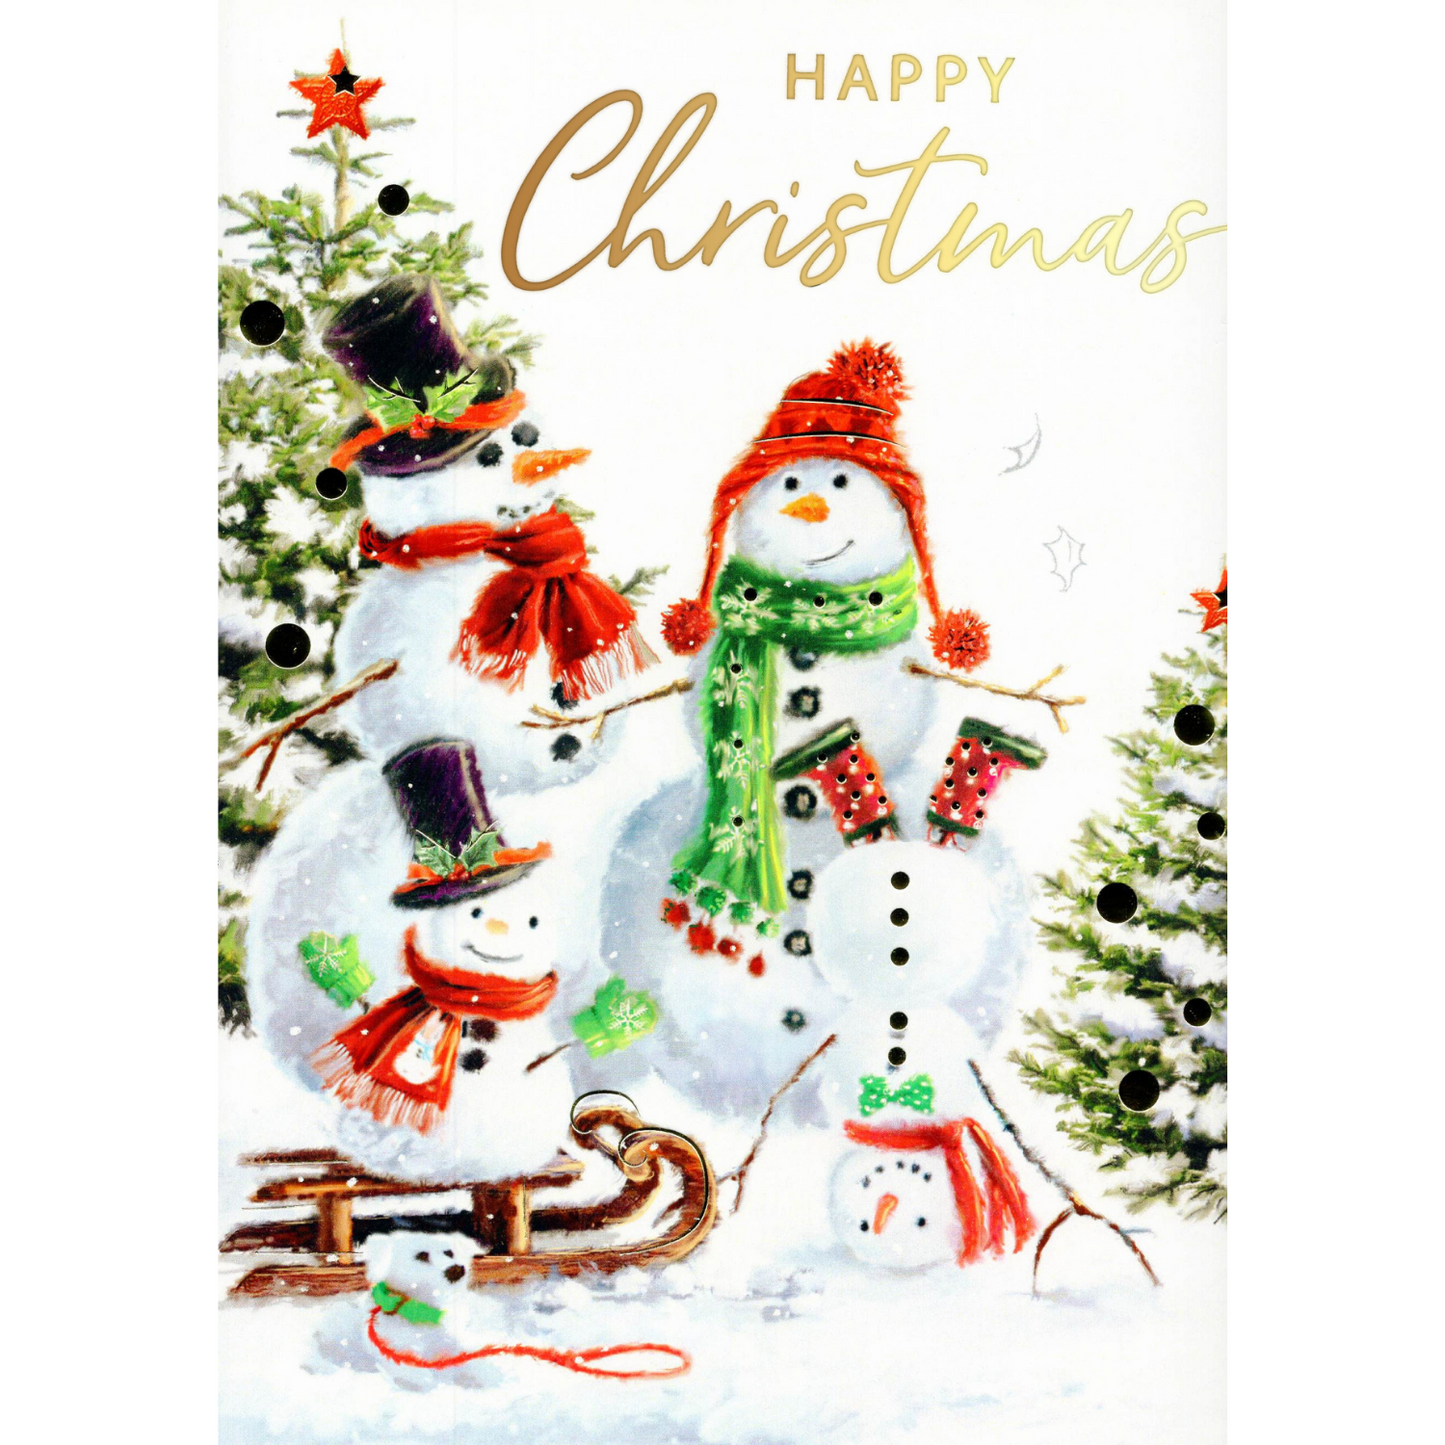 Musical Frosty Snowman Singing Happy Christmas Card